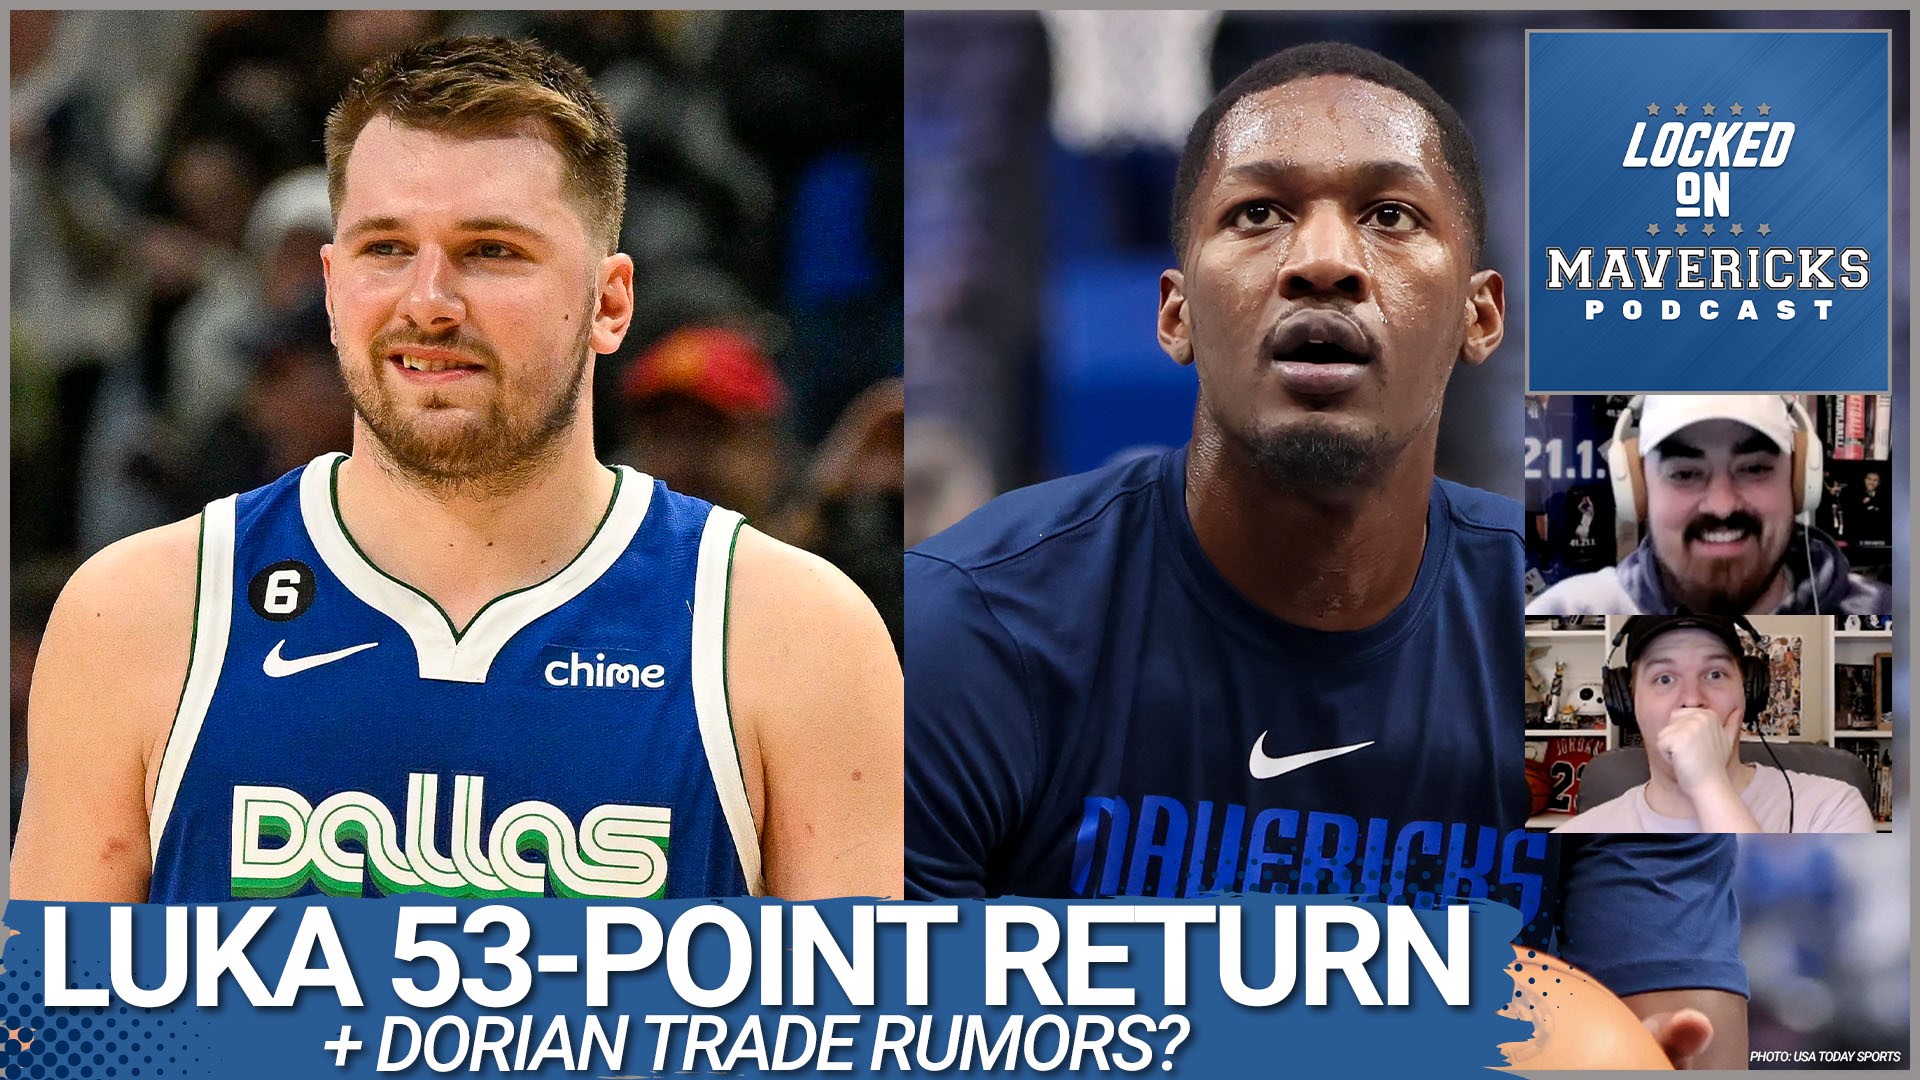 Nick Angstadt & Isaac Harris breakdown the Mavs win over the Pistons, how Luka Doncic dominated, and if Dorian is available in a trade.